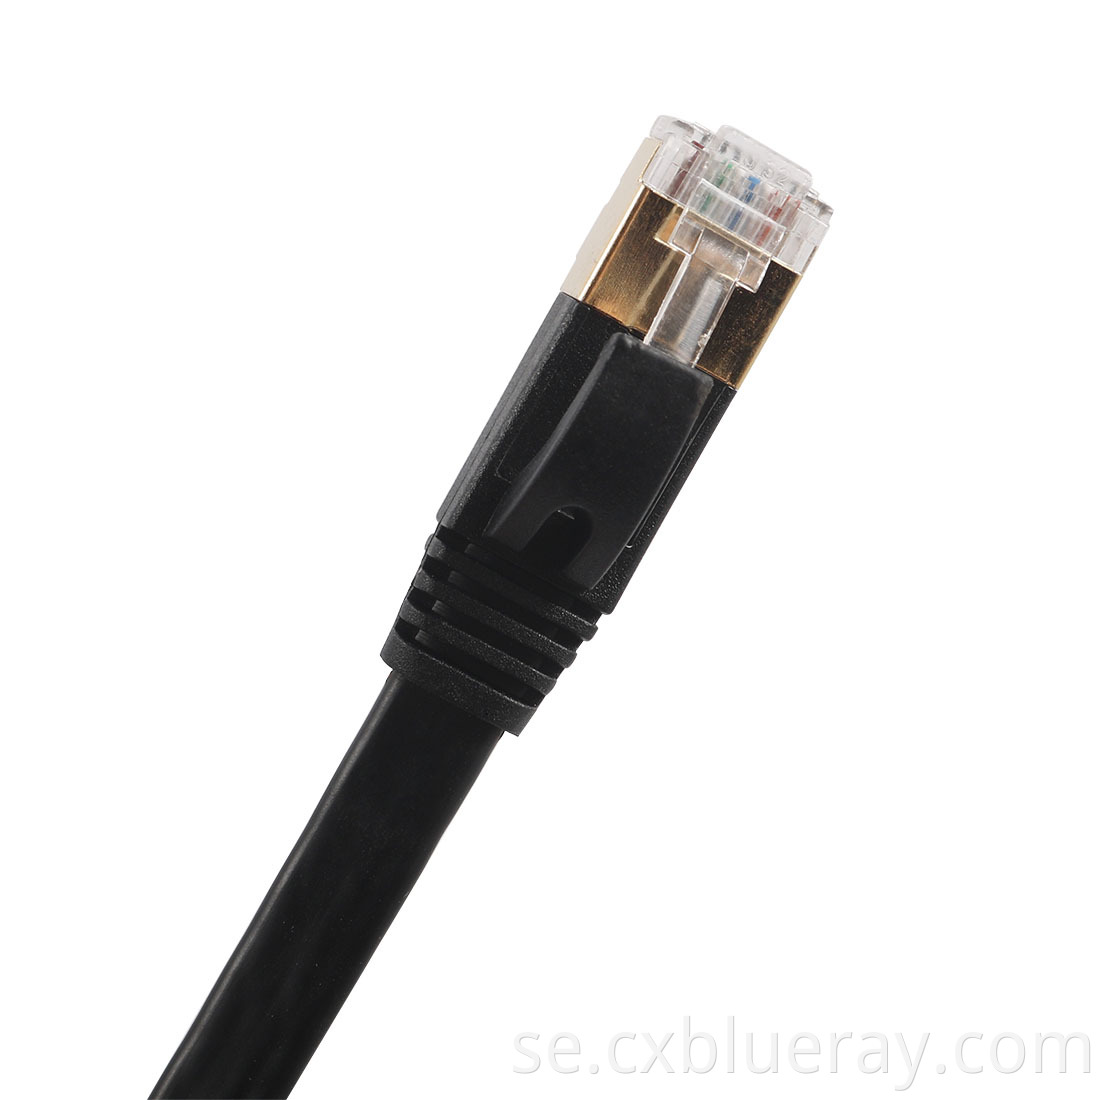 Cat7 network Cable Shielded High Speed Flat Internet Lan cable Computer patch cord cat7 ethernet cable